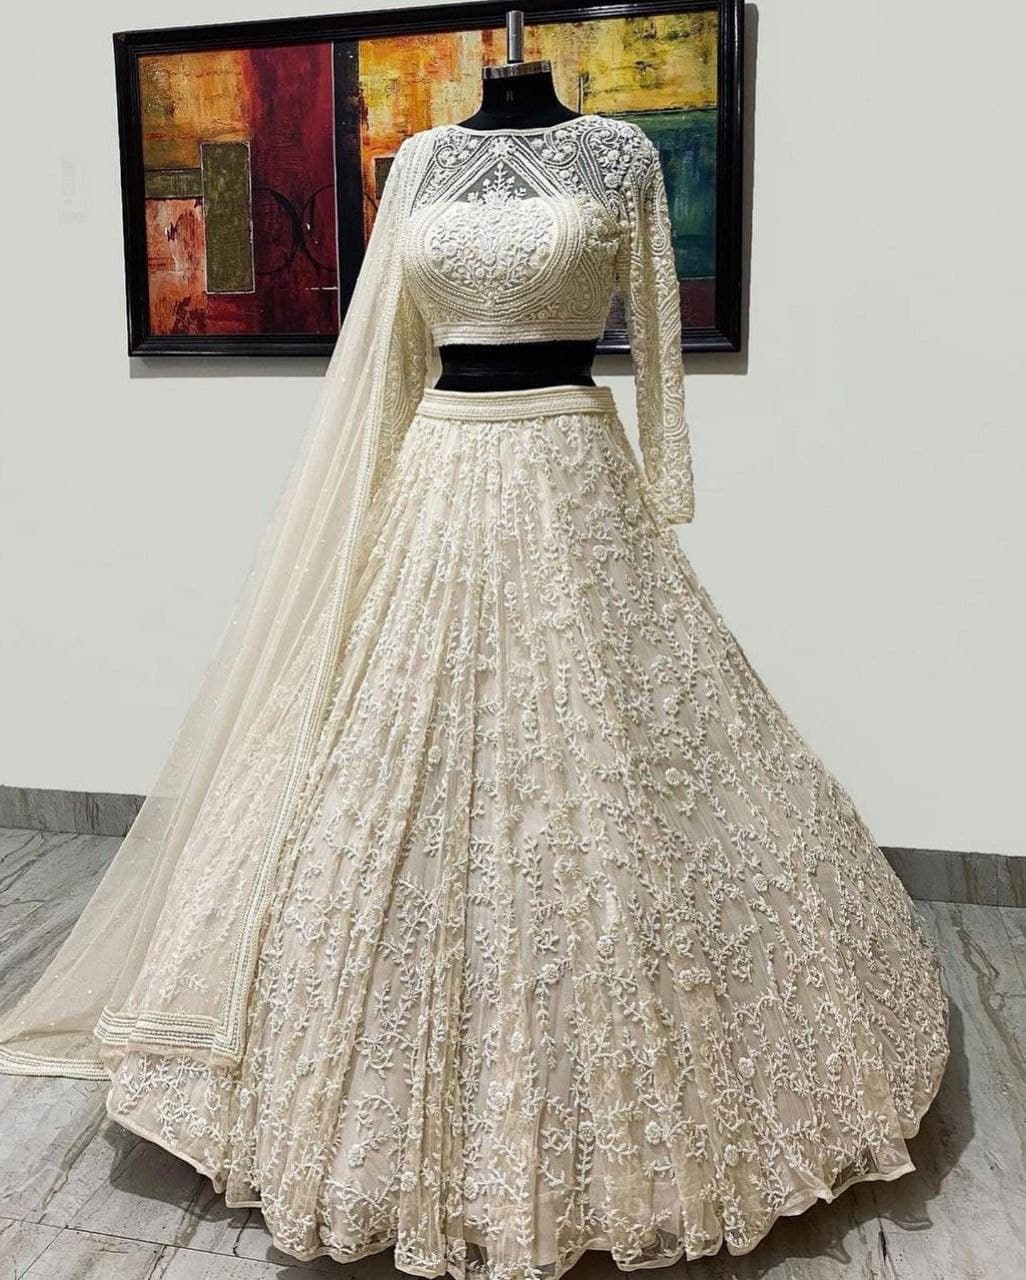 45+ White Lehengas with Price Perfect for the Ethereal Royal Look on Your  Wedding Day